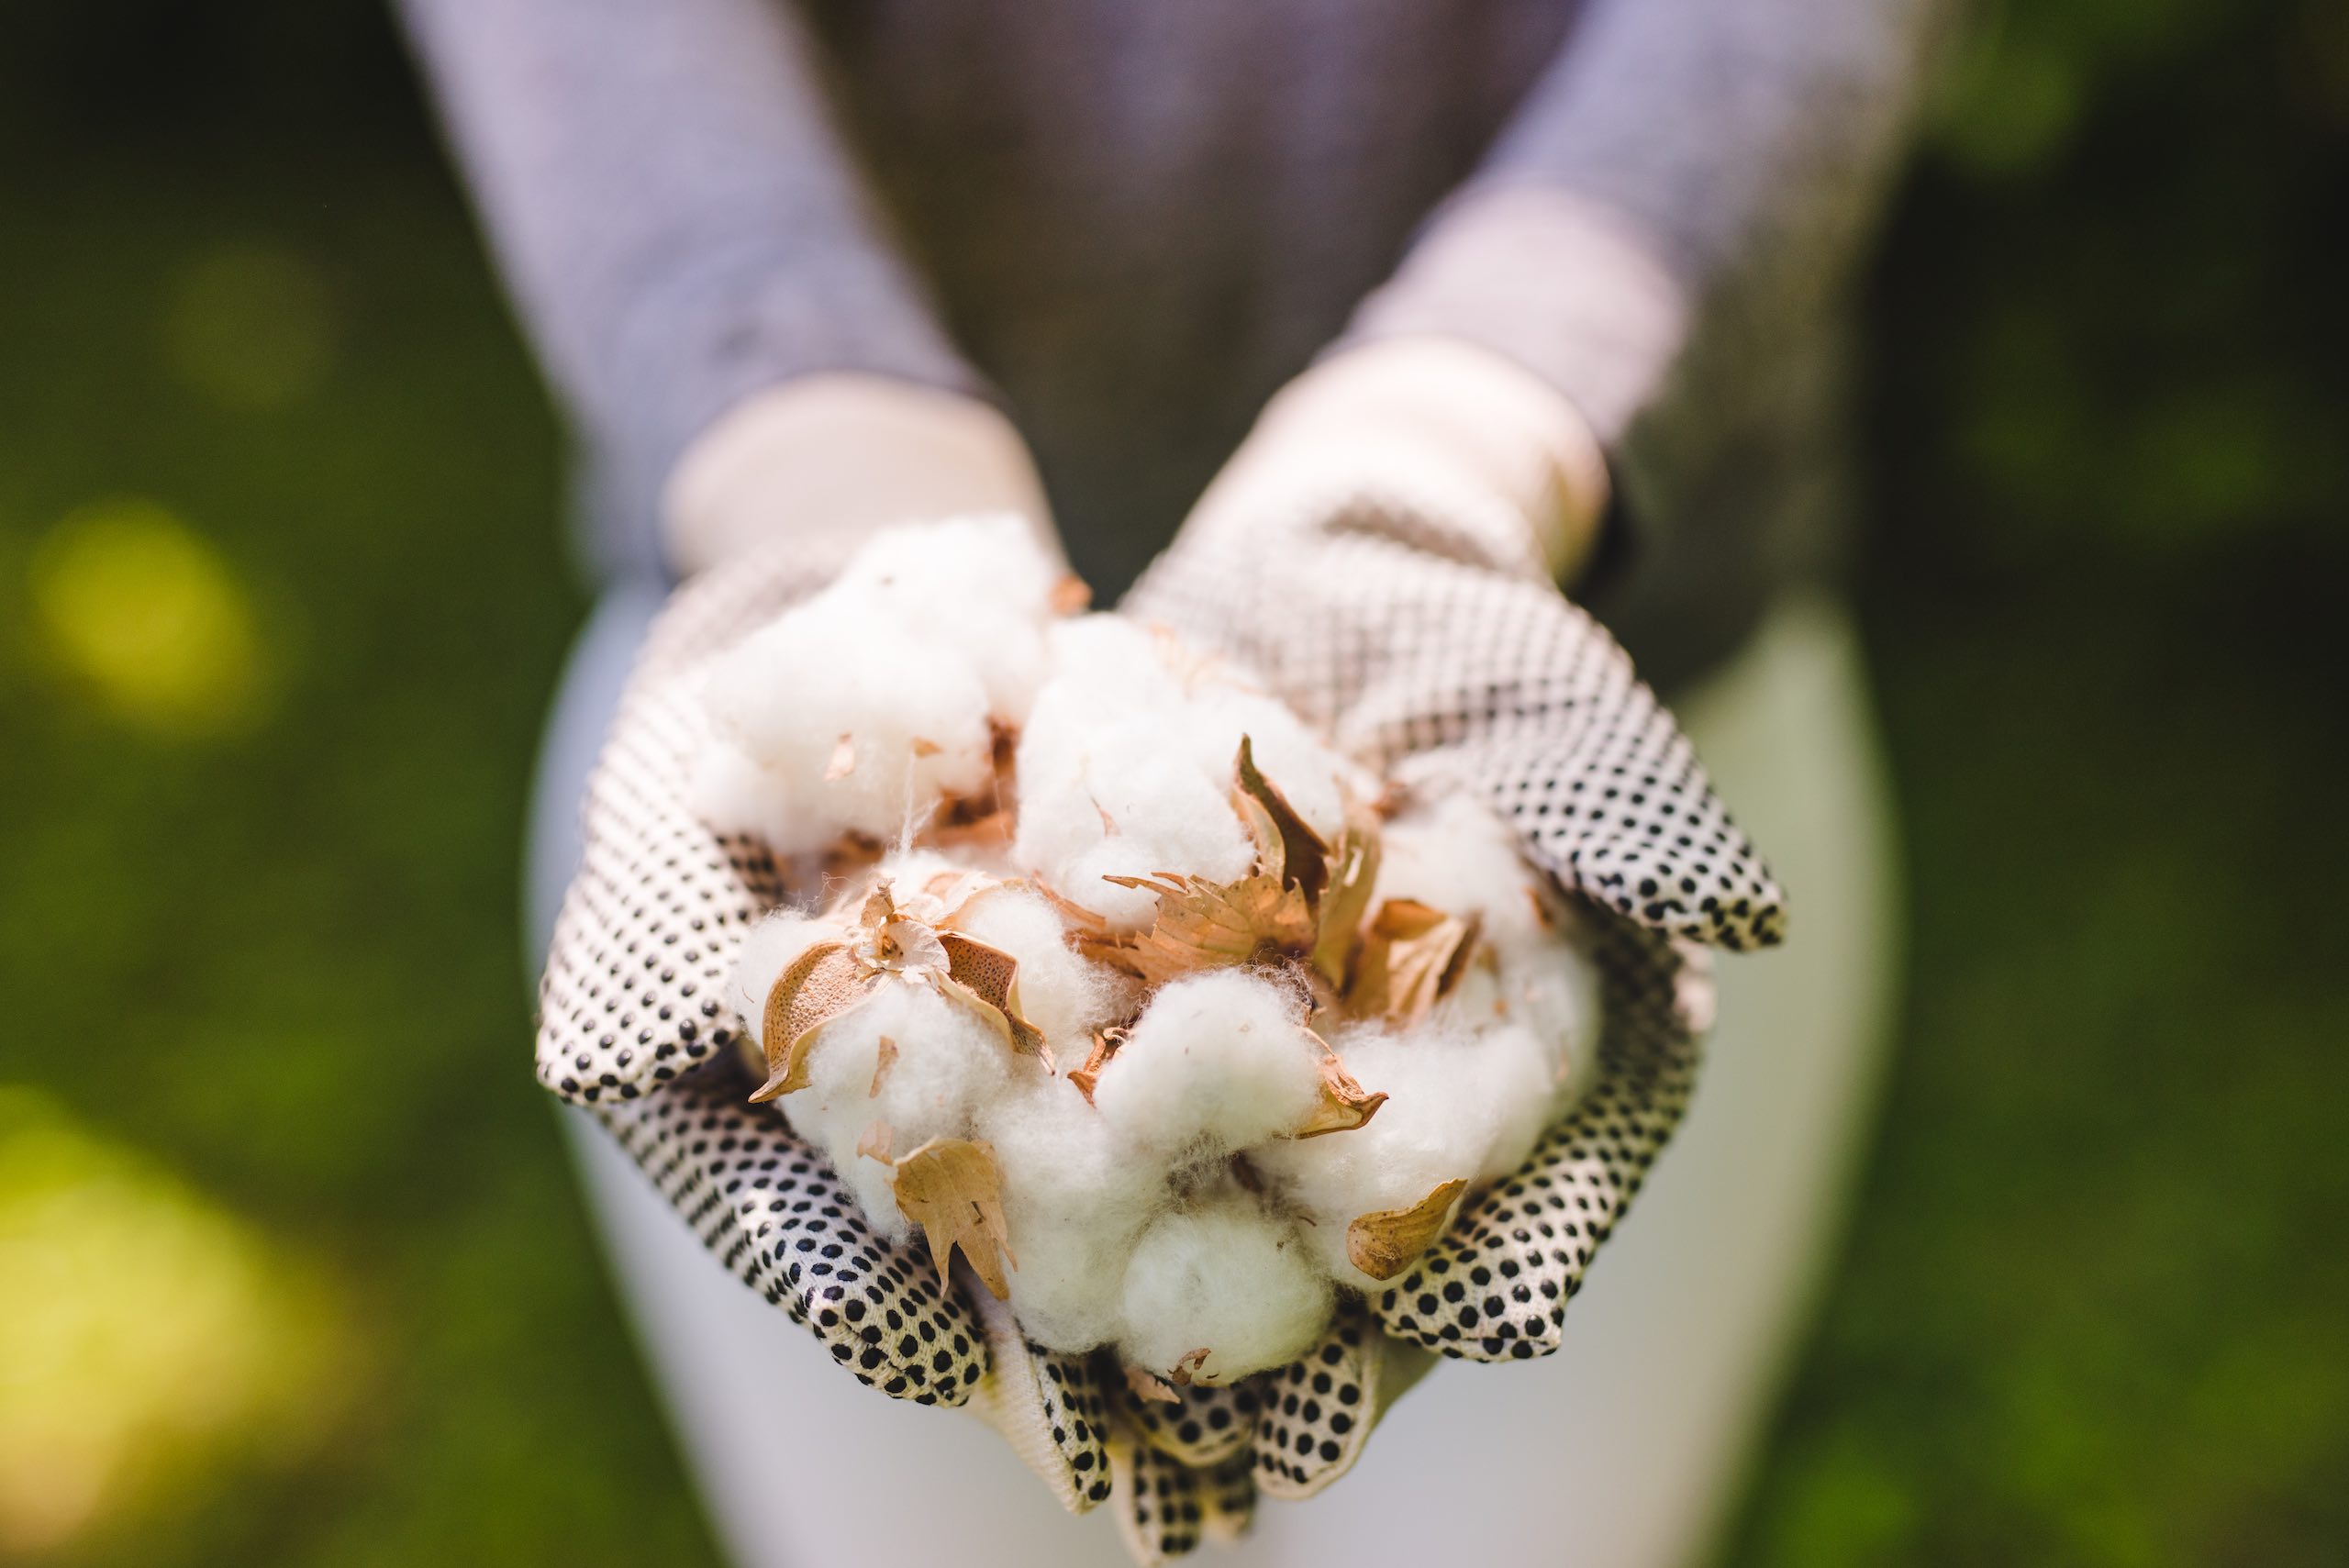 Person holding picked balls of cotton in white gloves with black dots